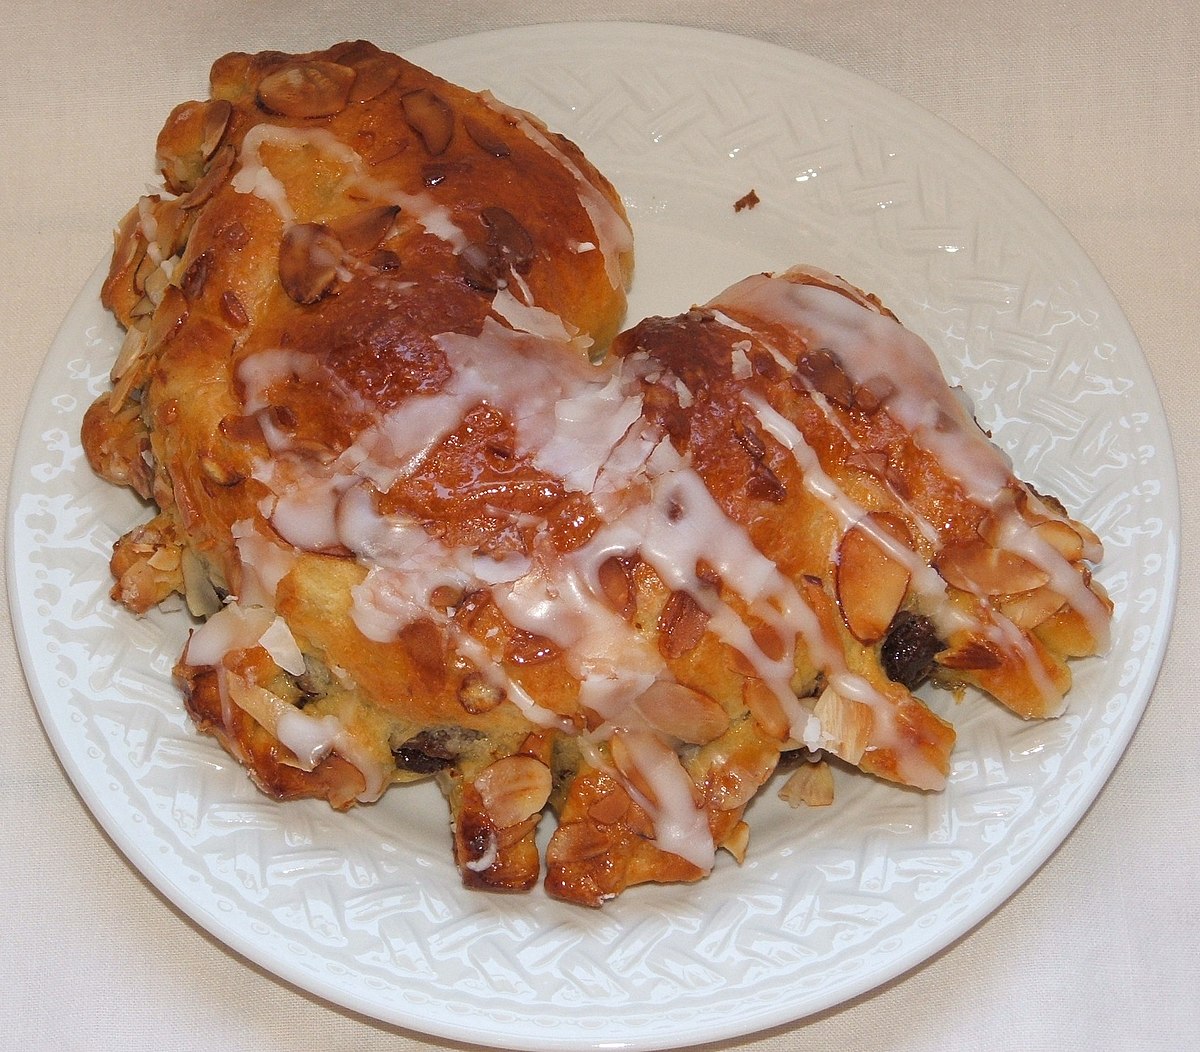 1200px-Bear_claw_pastry.JPG